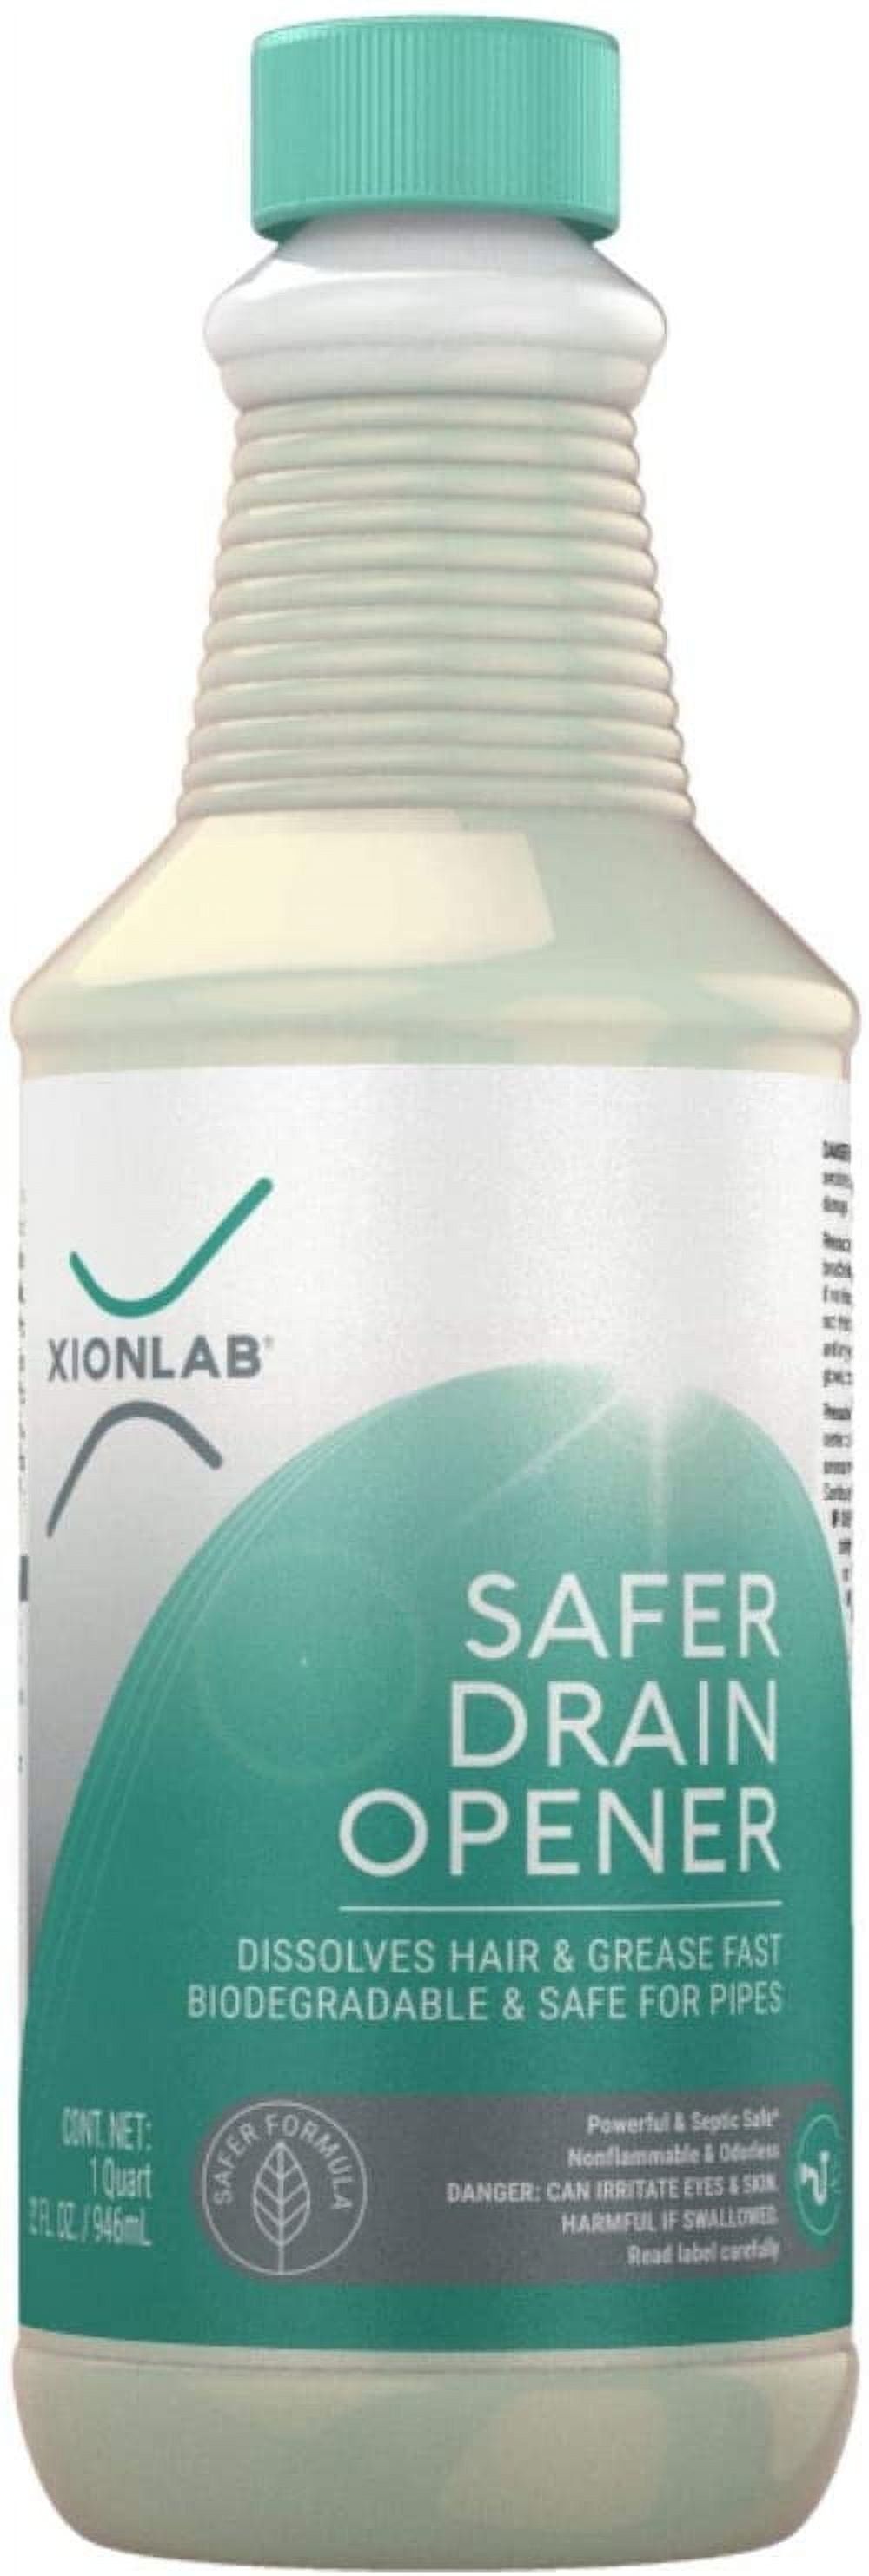 XionLab Industrial-Strength Liquid - 32 oz | 2 USES | Drain Opener + Drain  Cleaner + Hair & Grease Clog Remover - Biodegradable for Bathroom Sink